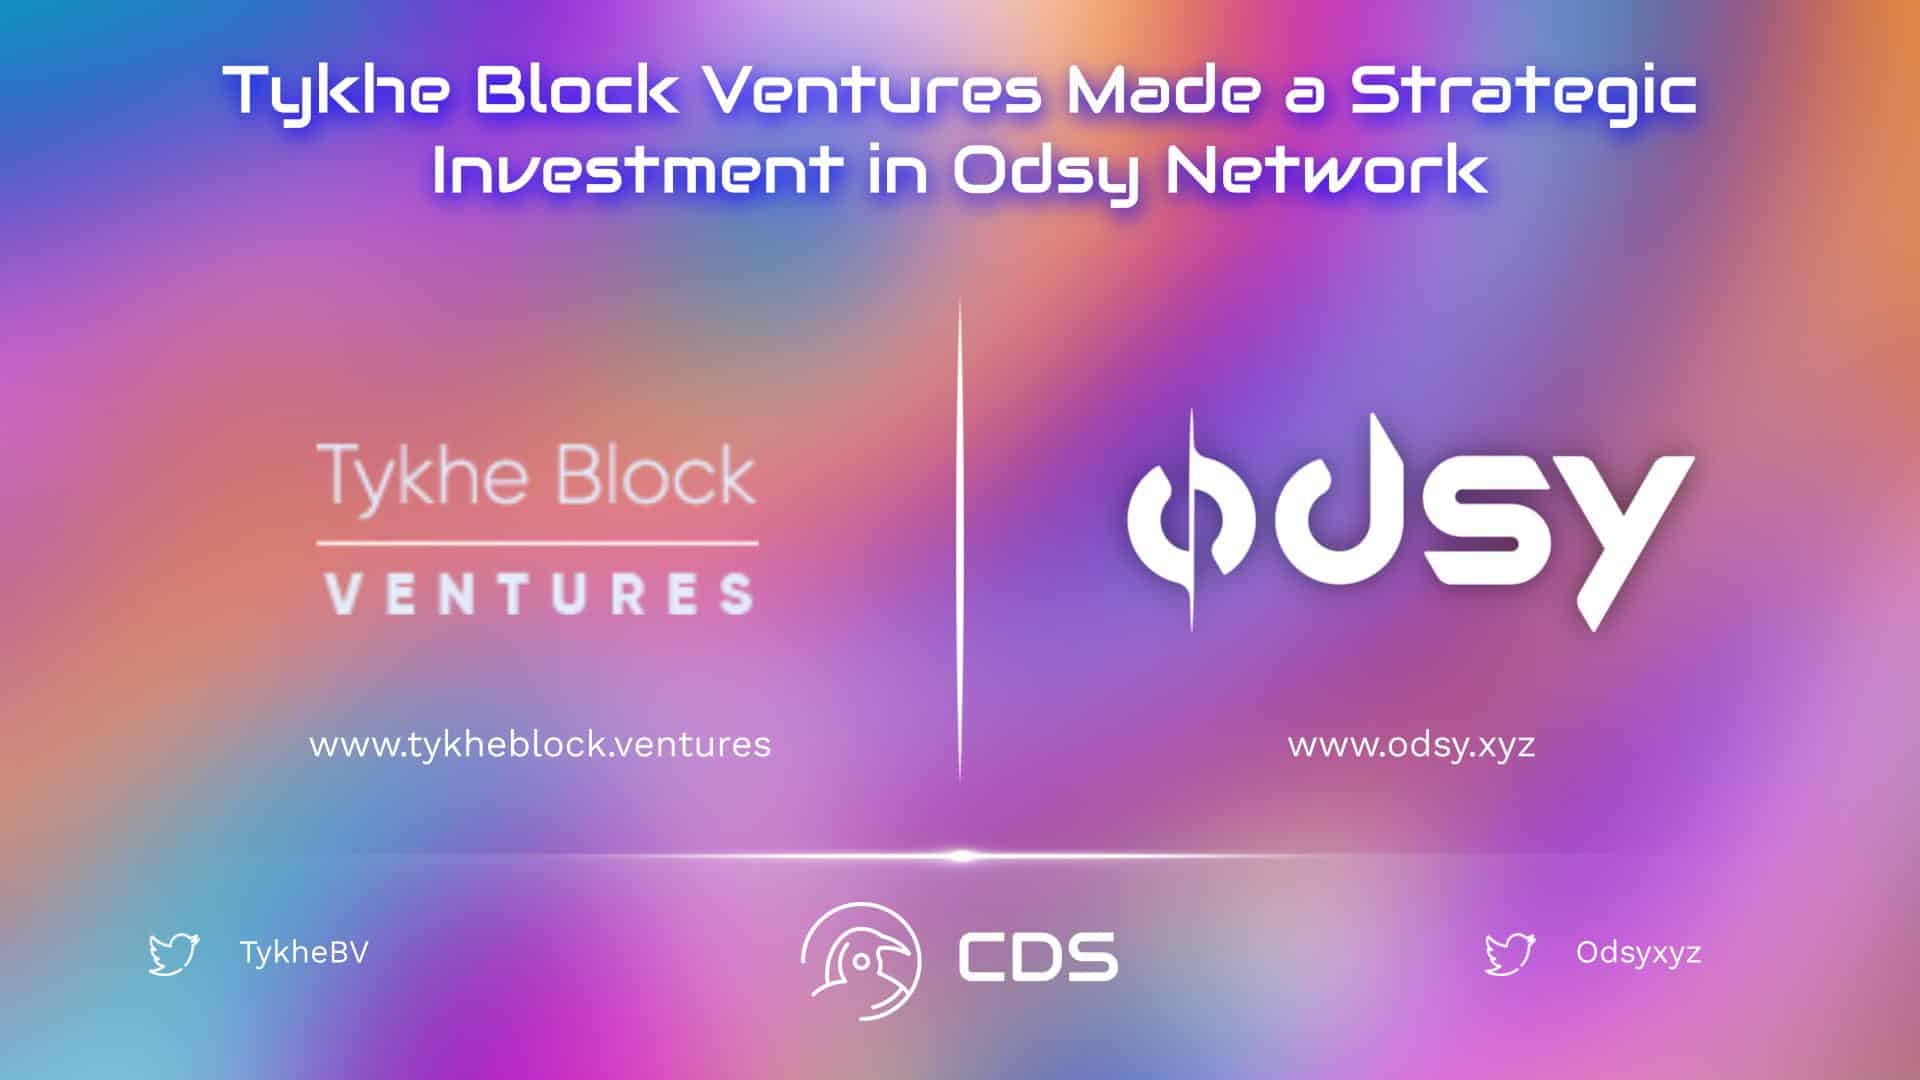 Tykhe Block Ventures Made a Strategic Investment in Odsy Network